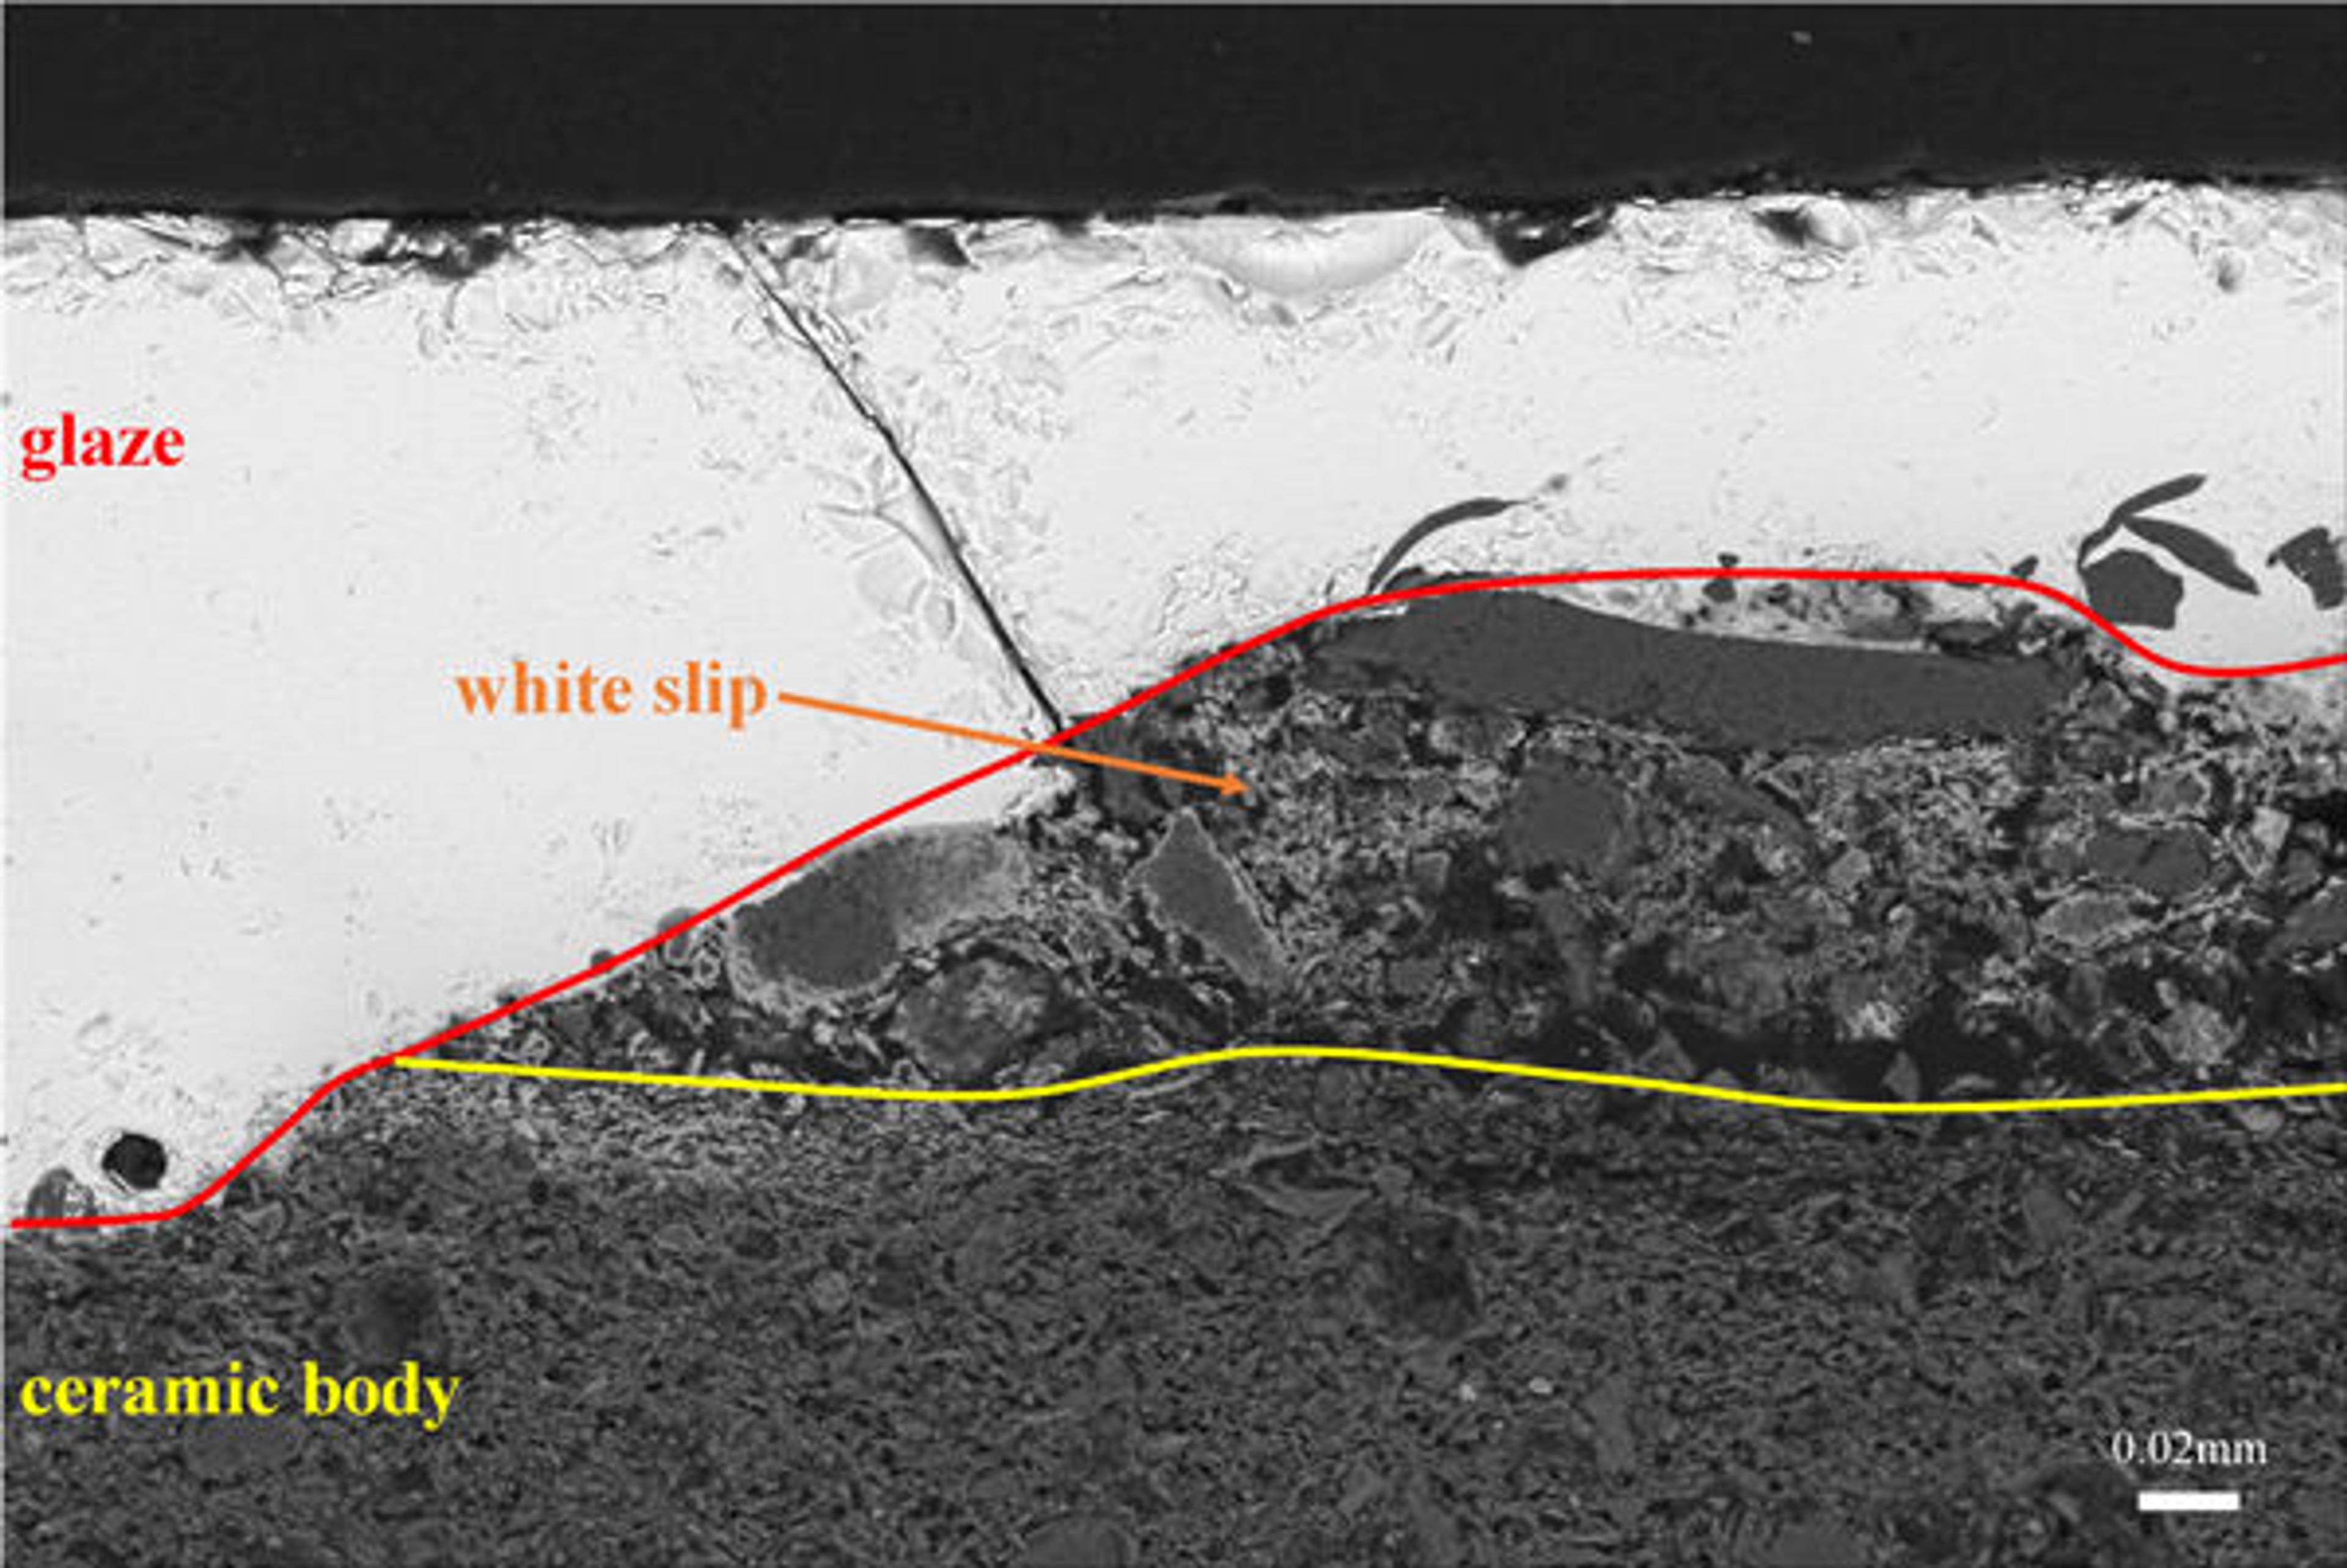 Fig. 4. SEM image showing the three main components of each sgraffito ware: the ceramic body, the white slip, and the glaze.